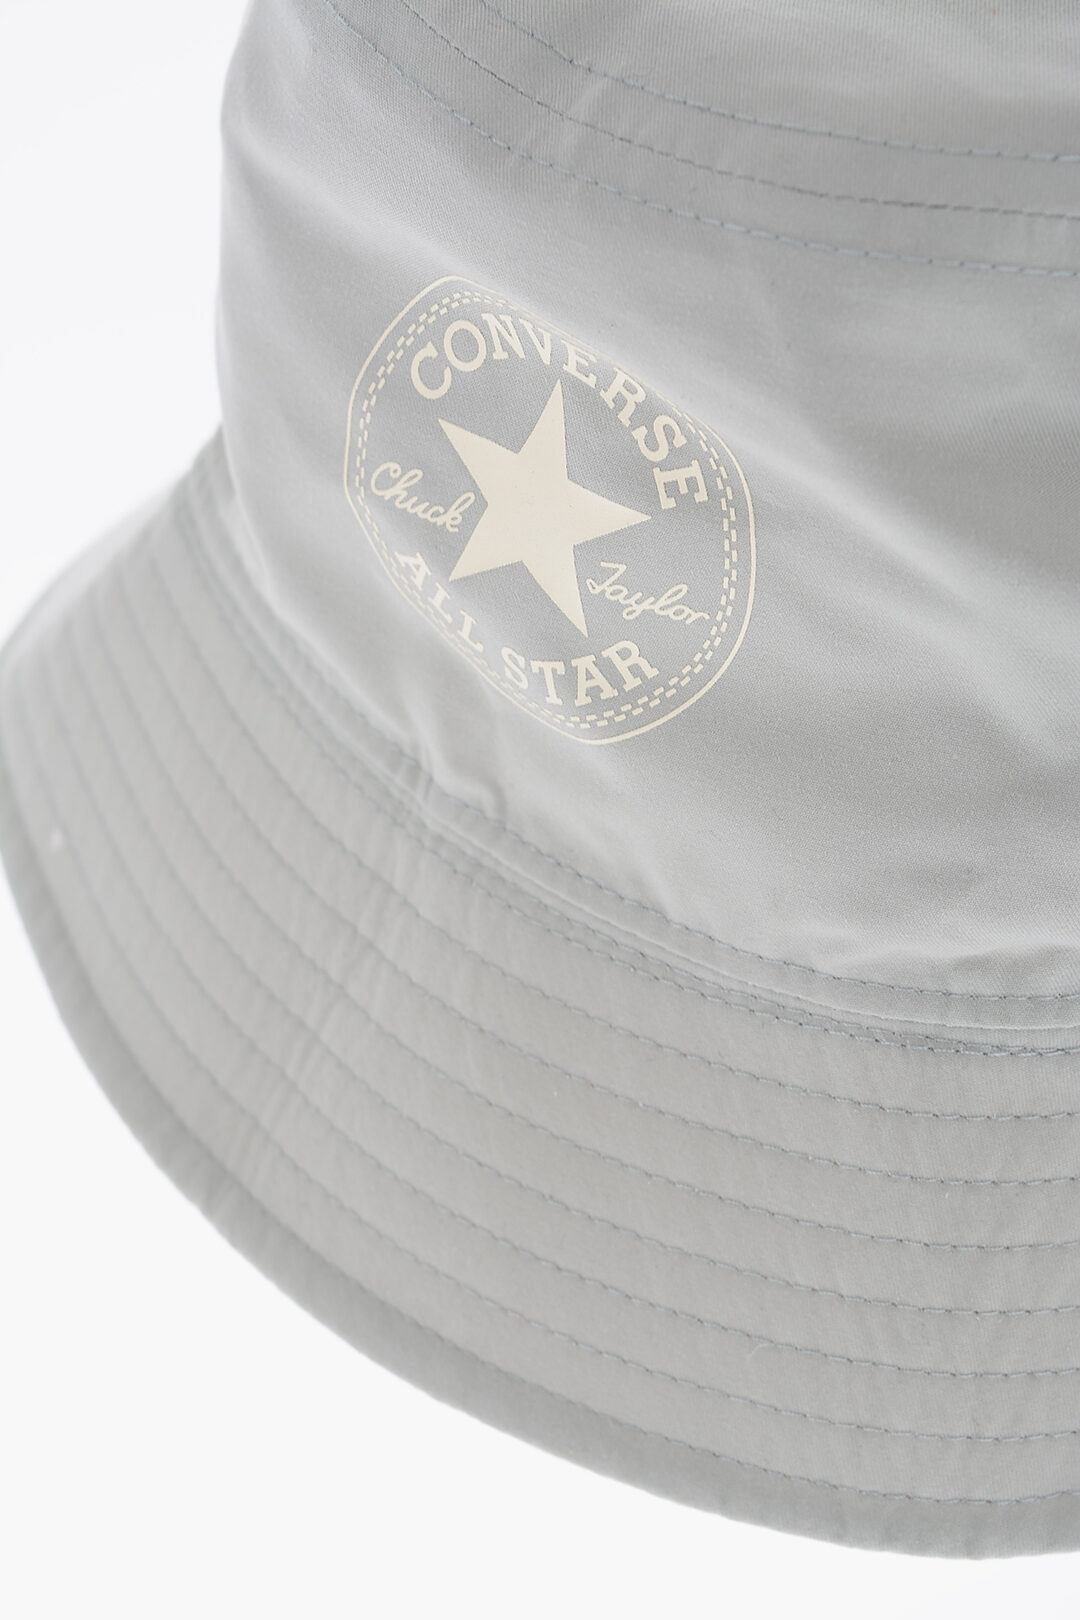 Converse ALL-STAR CHUCK TAYLOR Two-Tone Bucket Hat men women Outlet